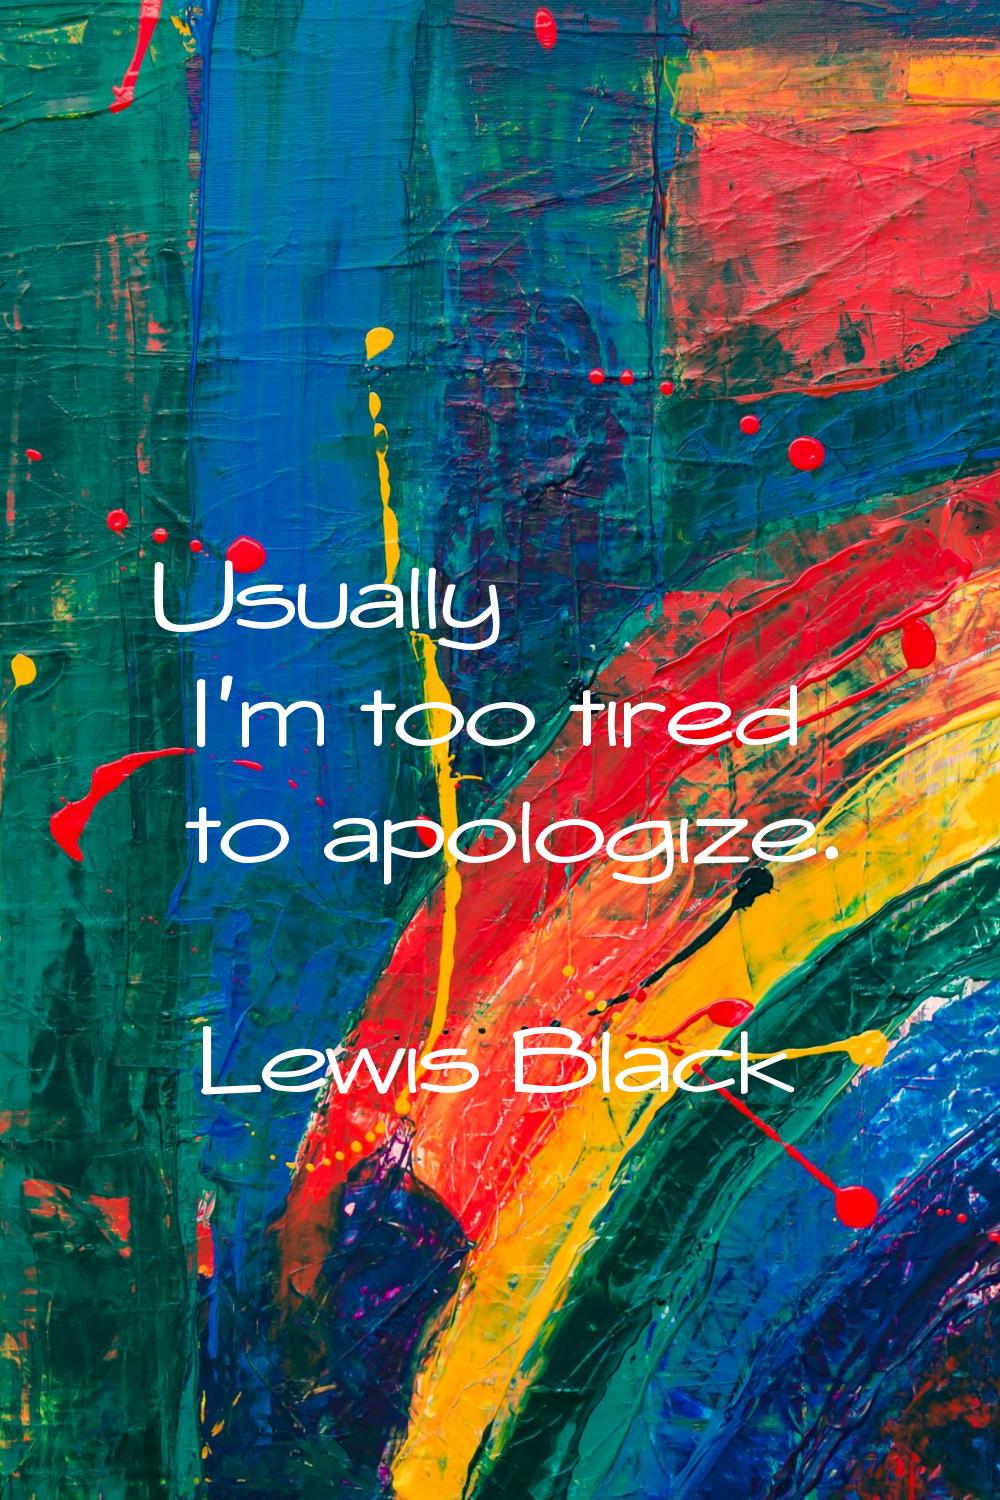 Usually I'm too tired to apologize.